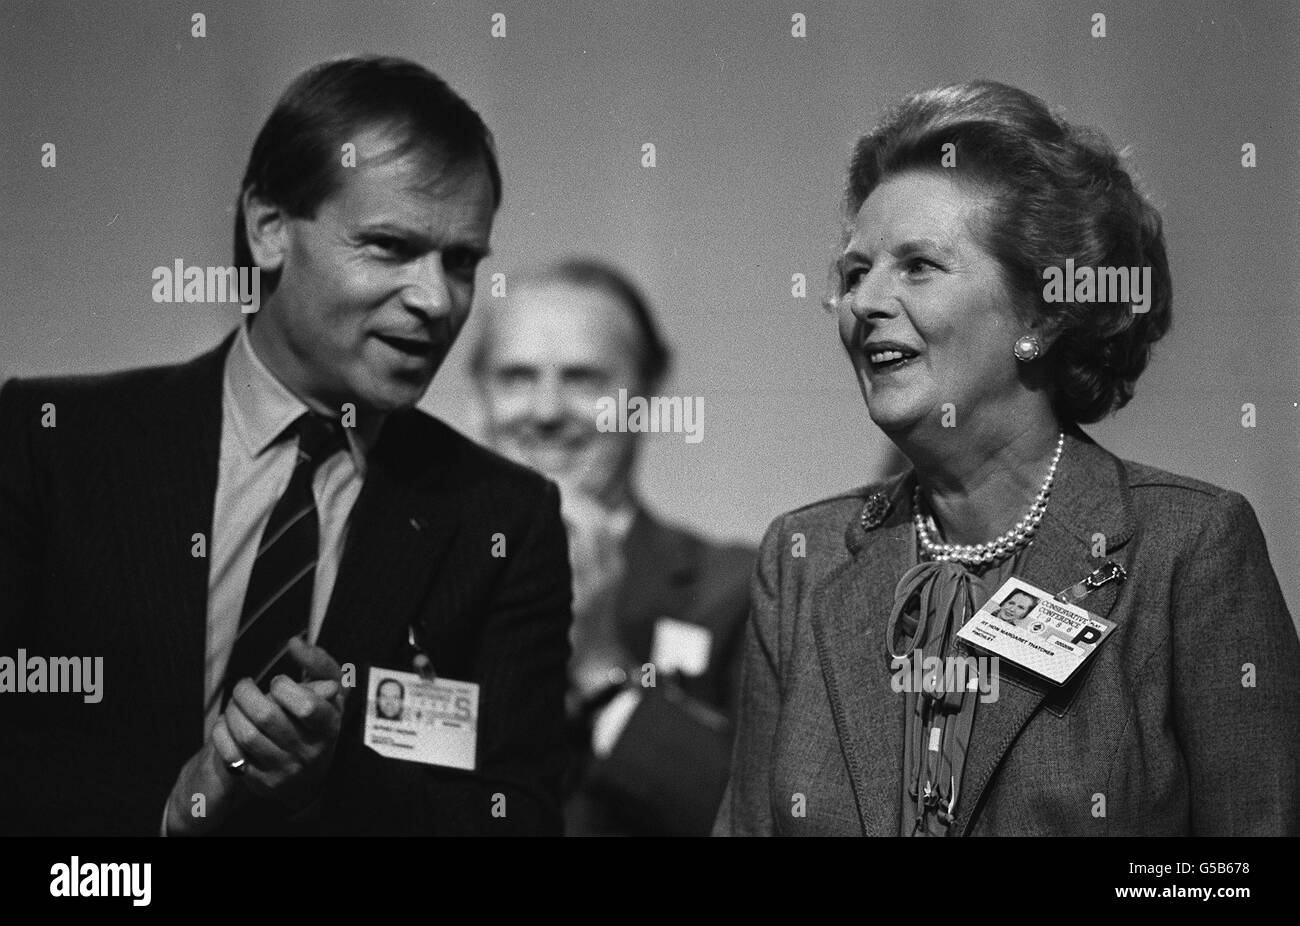 Prime Minister Margaret Thatcher with Jeffrey Archer, deputy chairman of the Conservative Party at the 1986 party conference in Bournemouth. * 7/10/86 of the Prime Minister Margaret Thatcher with Jeffrey Archer, deputy chairman of the Conservative Party at the 1986 party conference in Bournemouth. Stock Photo